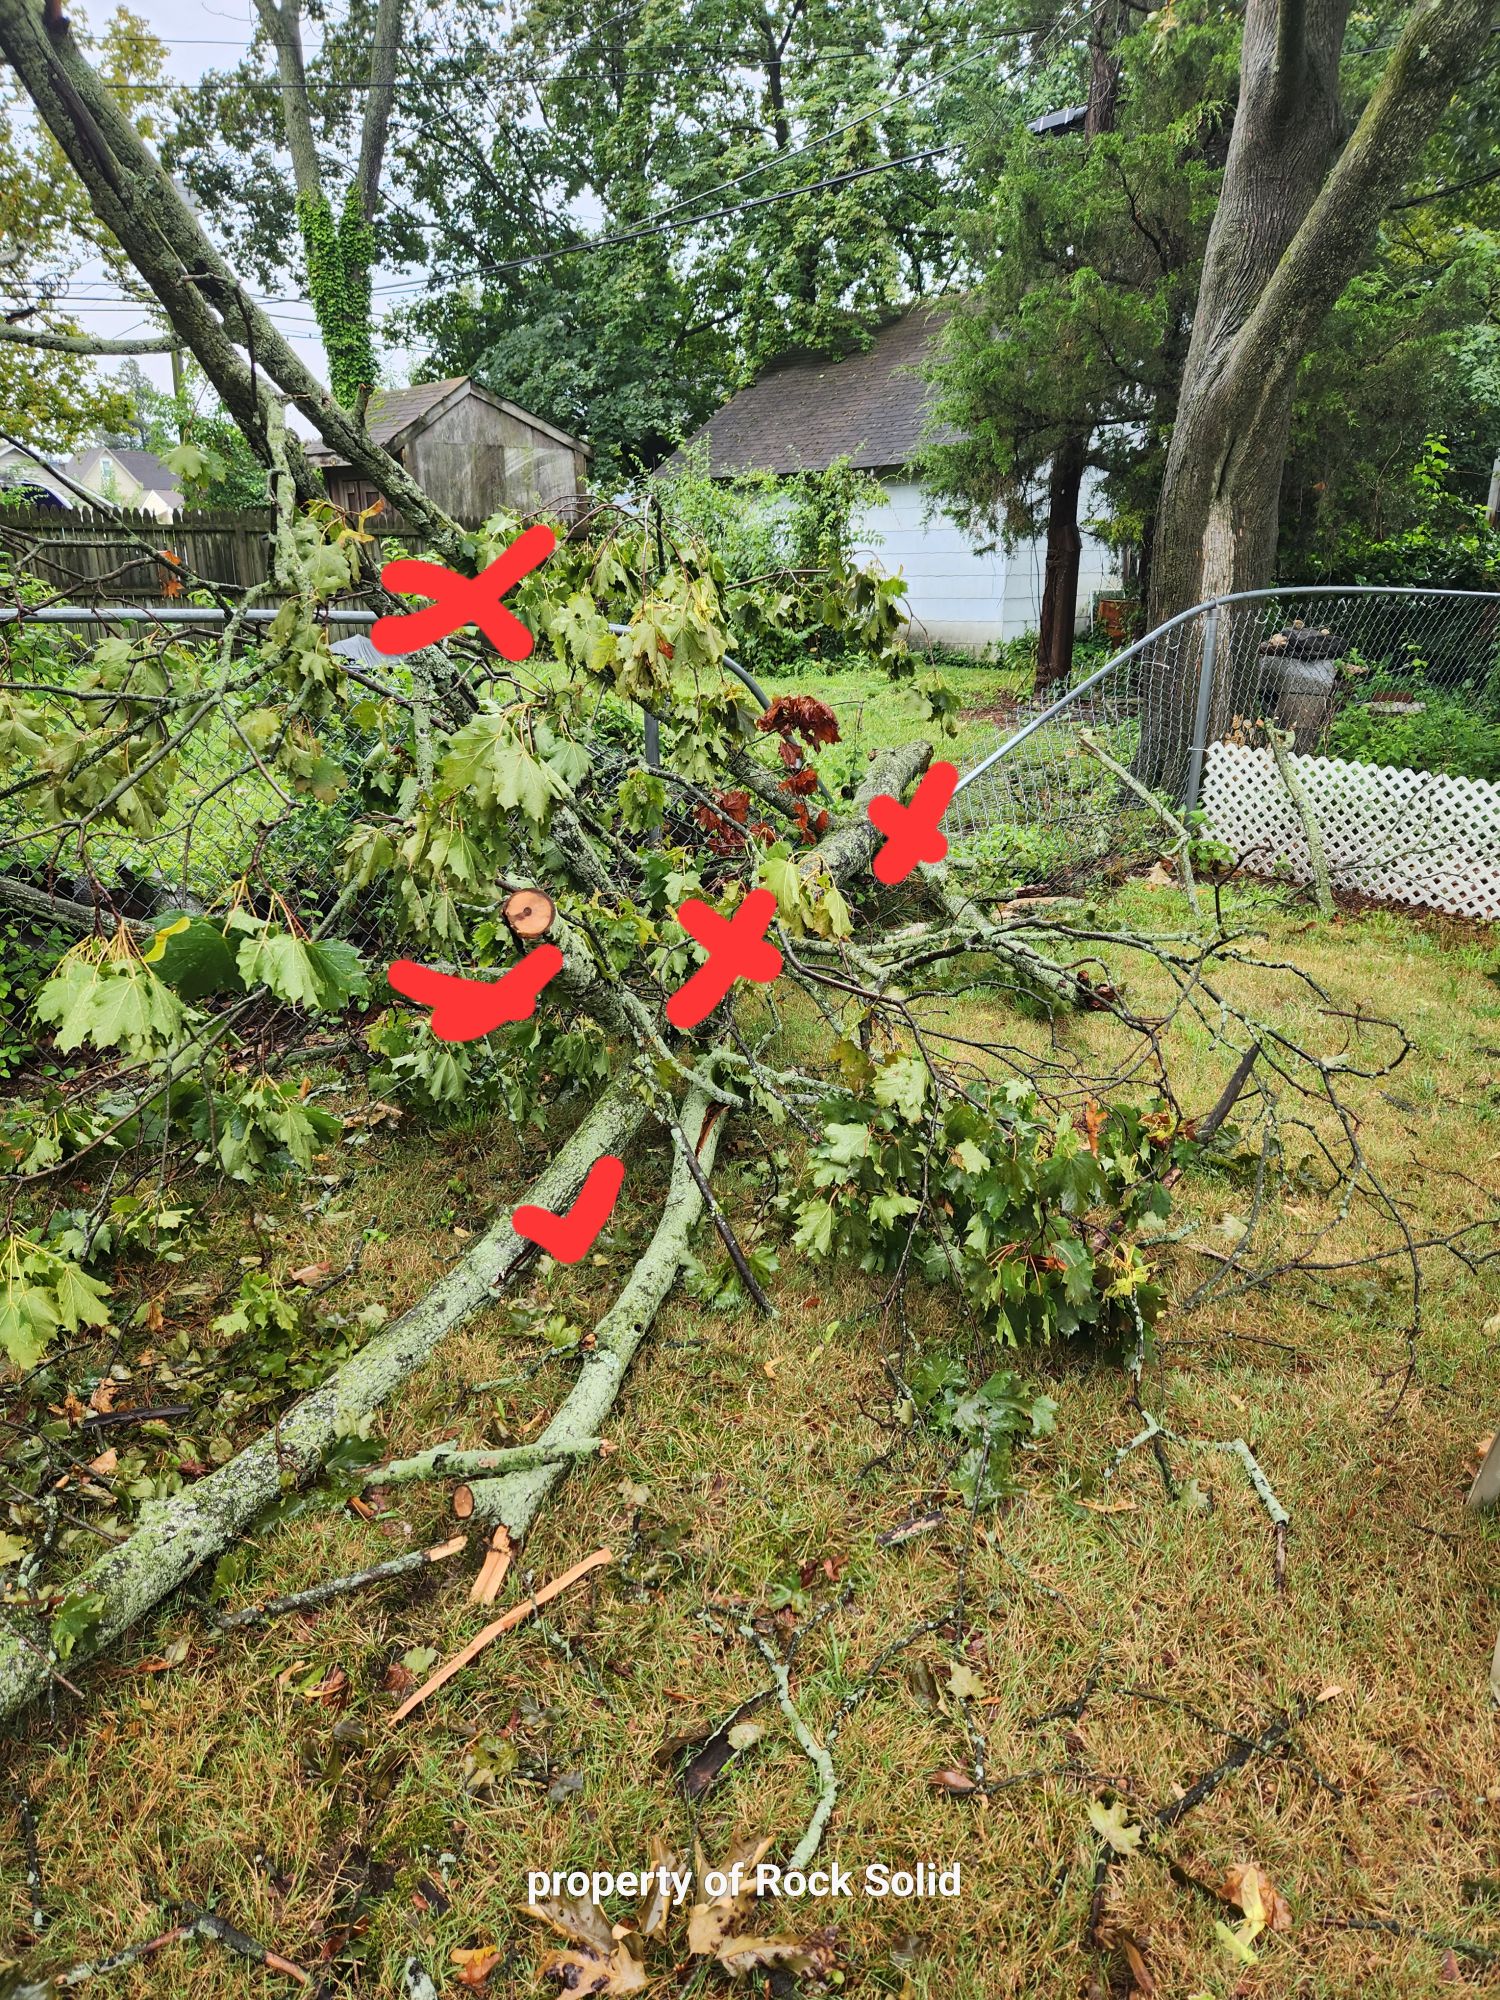 Rock Solid Tree Services and More, LLC 401 W Broad St, Palmyra New Jersey 08065